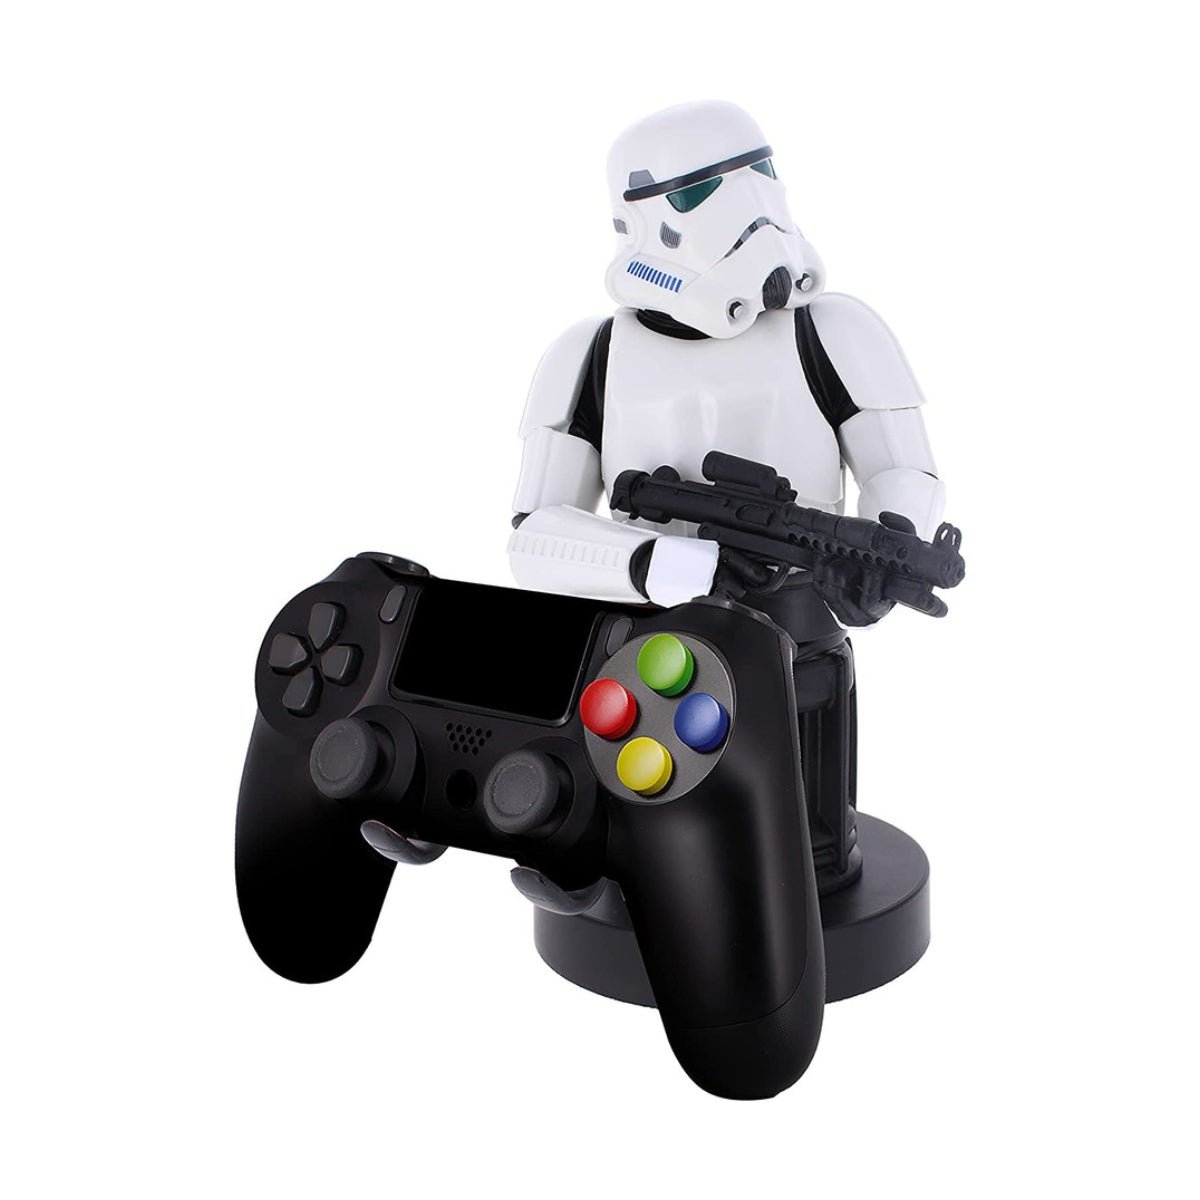 Cable Guys Remnant Stormtrooper Holder w/ Charging Cable - Store 974 | ستور ٩٧٤